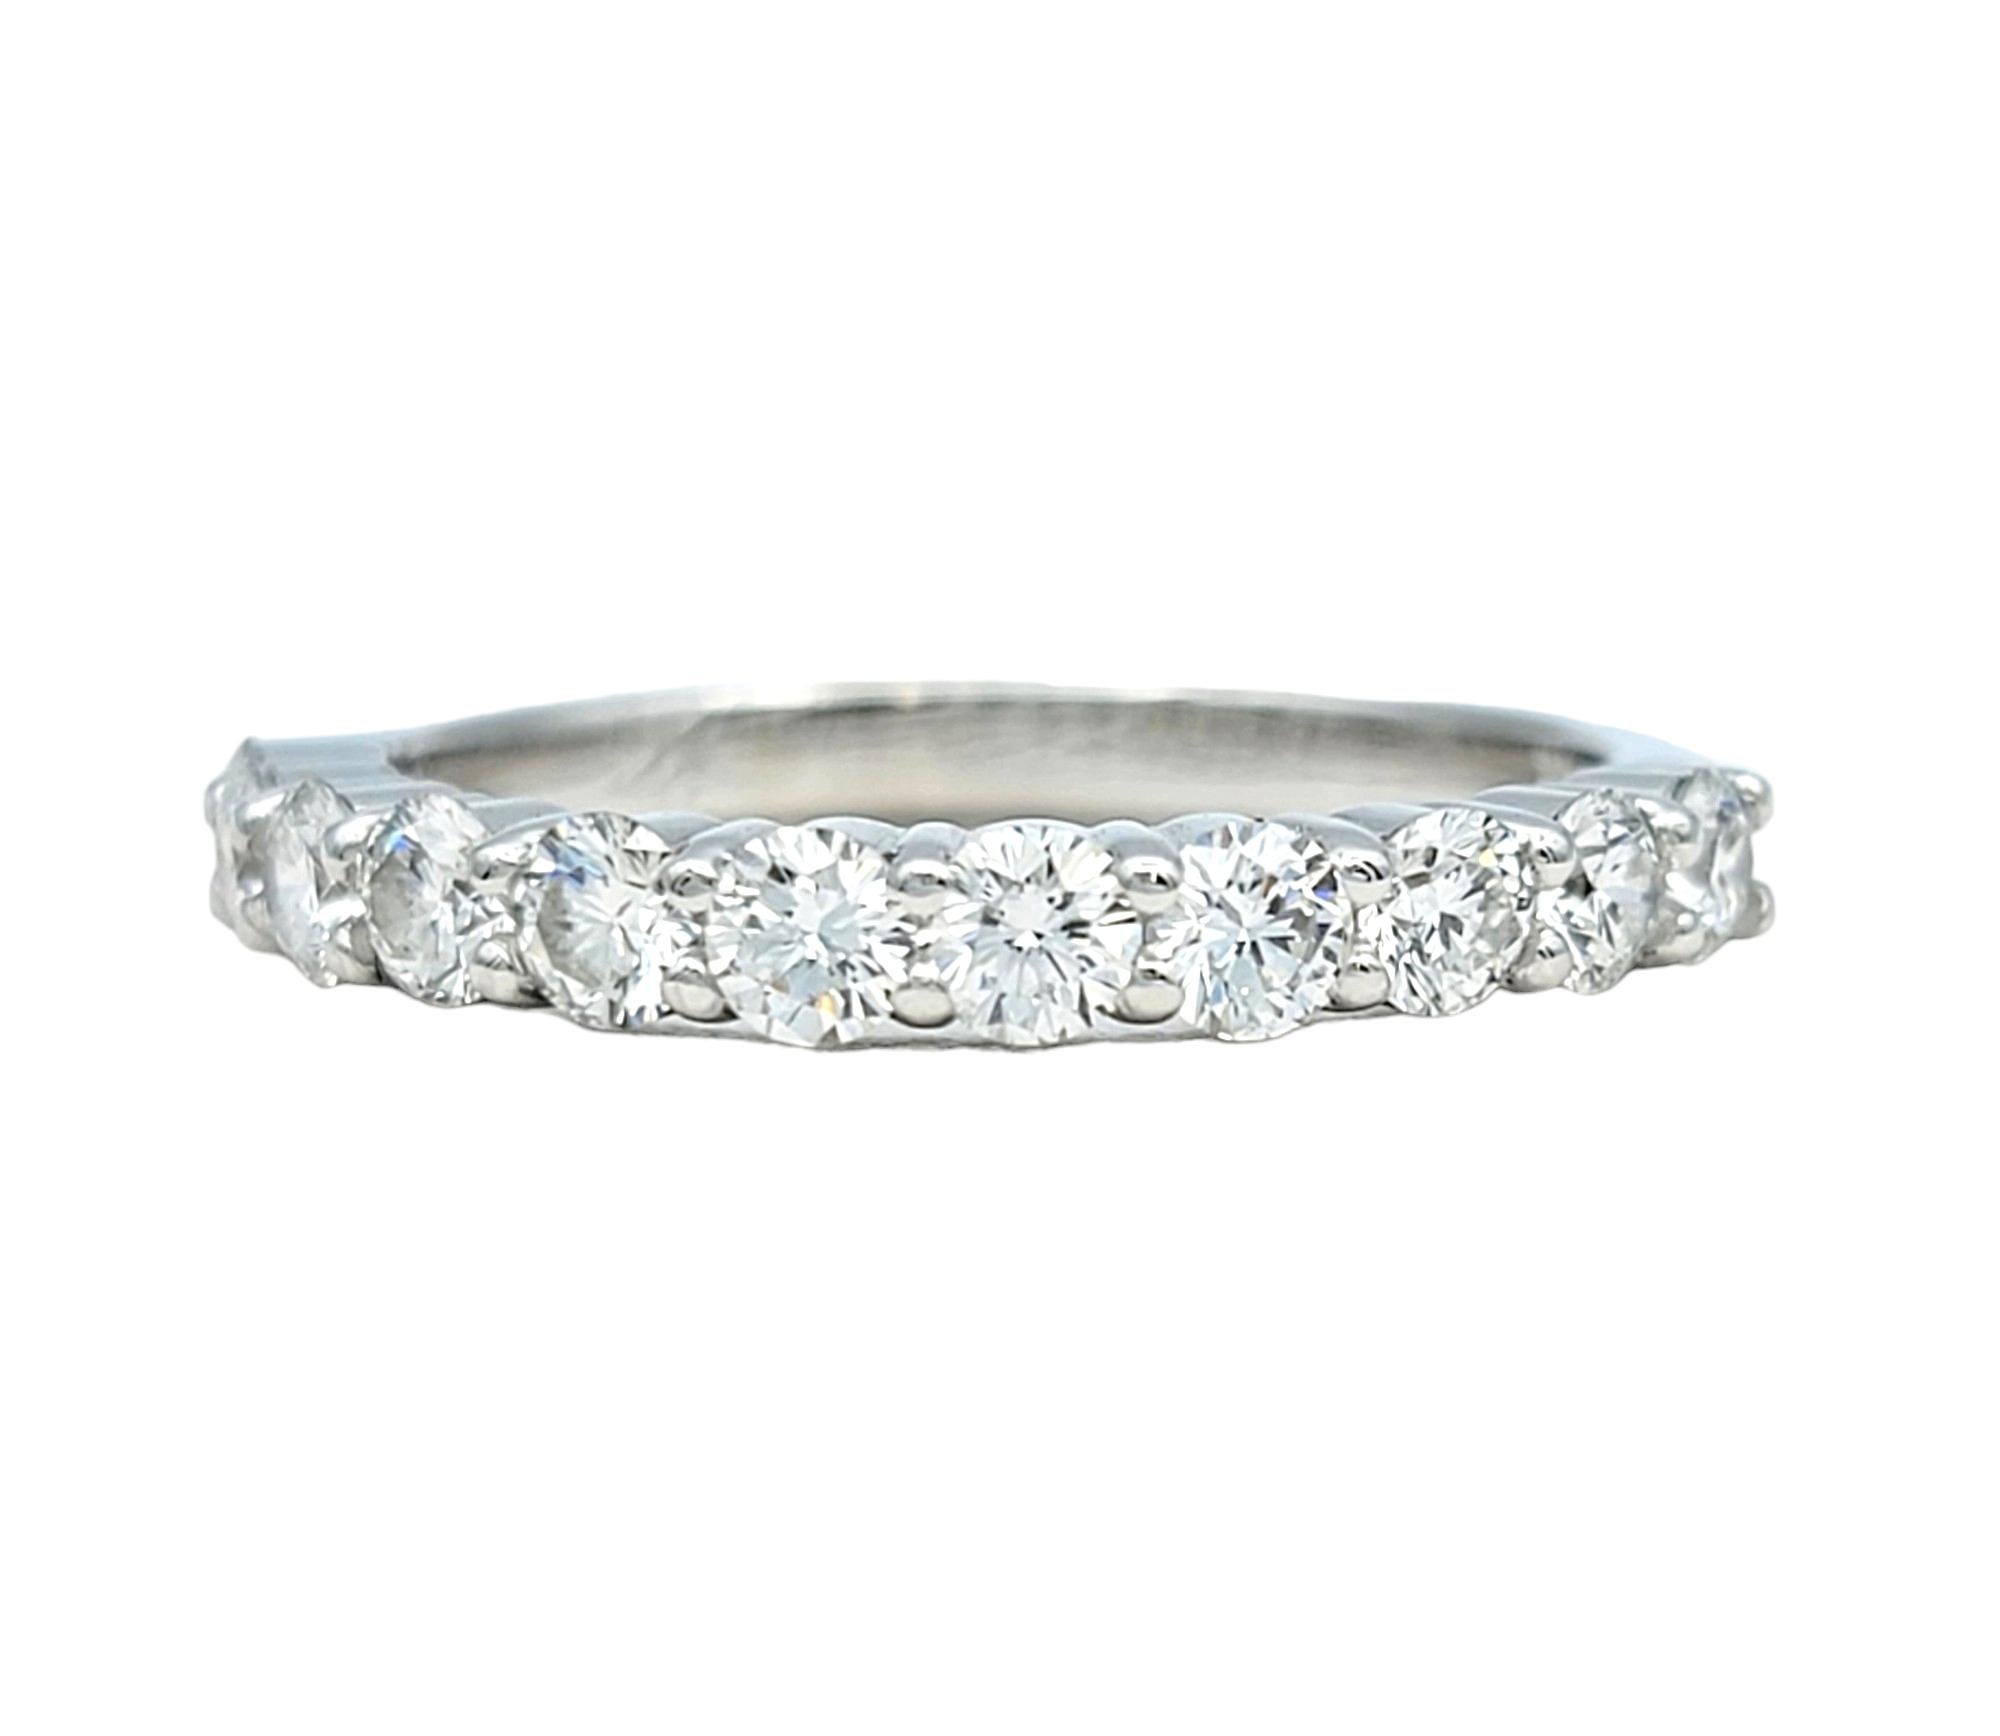 Ring Size: 6.5

This stunning band ring, set in exquisite 18 karat white gold, features a classic and versatile design. The semi-eternity style showcases a continuous row of round diamonds, creating a timeless and elegant appearance. This design is